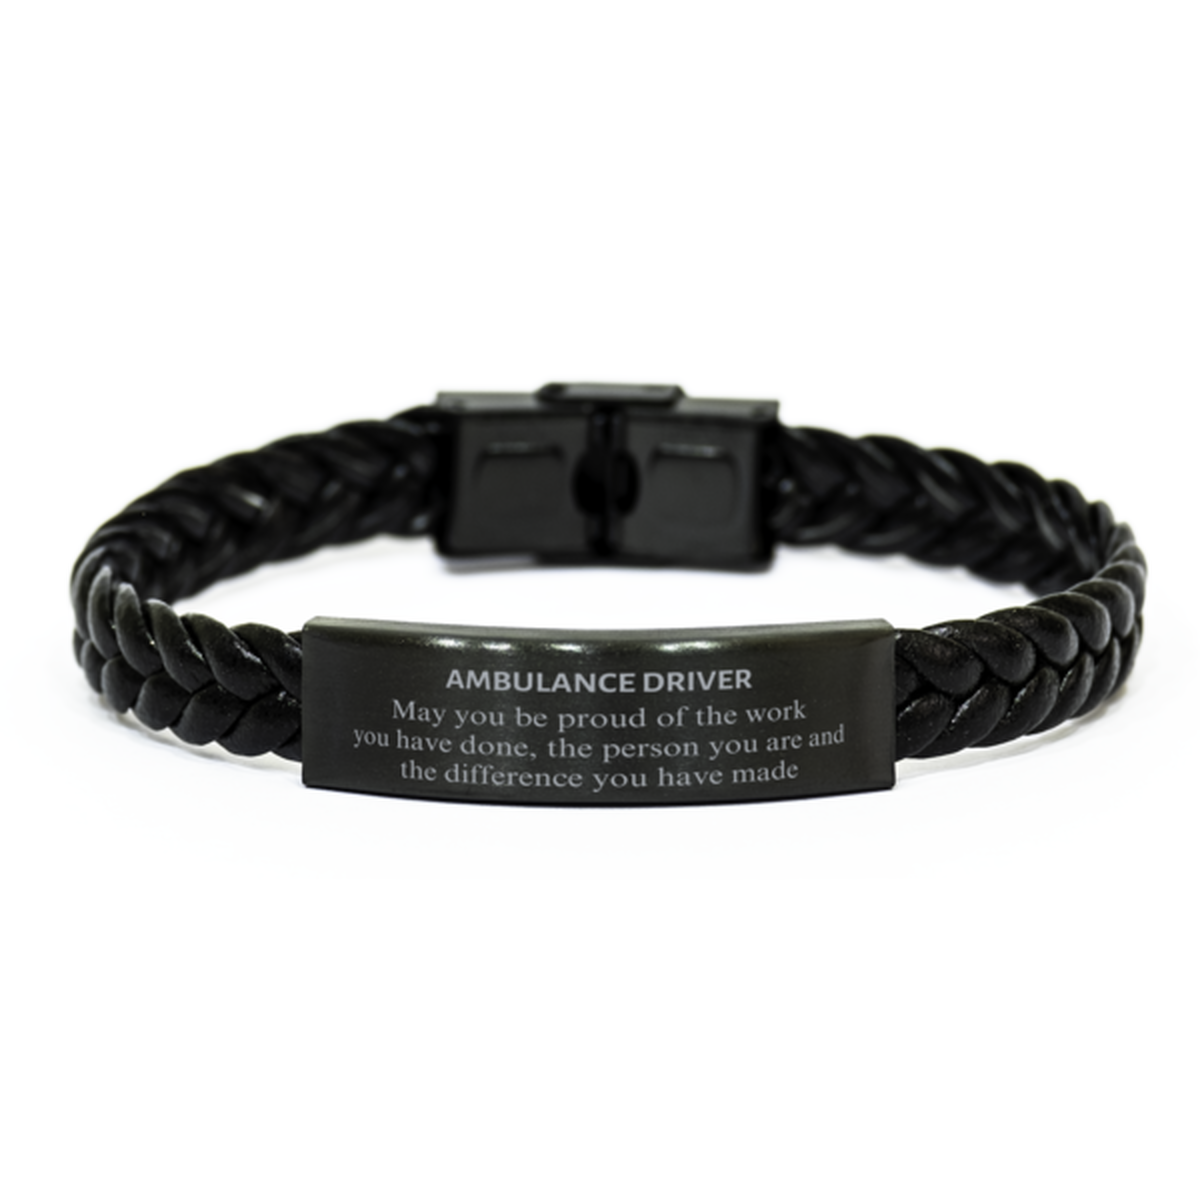 Ambulance Driver May you be proud of the work you have done, Retirement Ambulance Driver Braided Leather Bracelet for Colleague Appreciation Gifts Amazing for Ambulance Driver